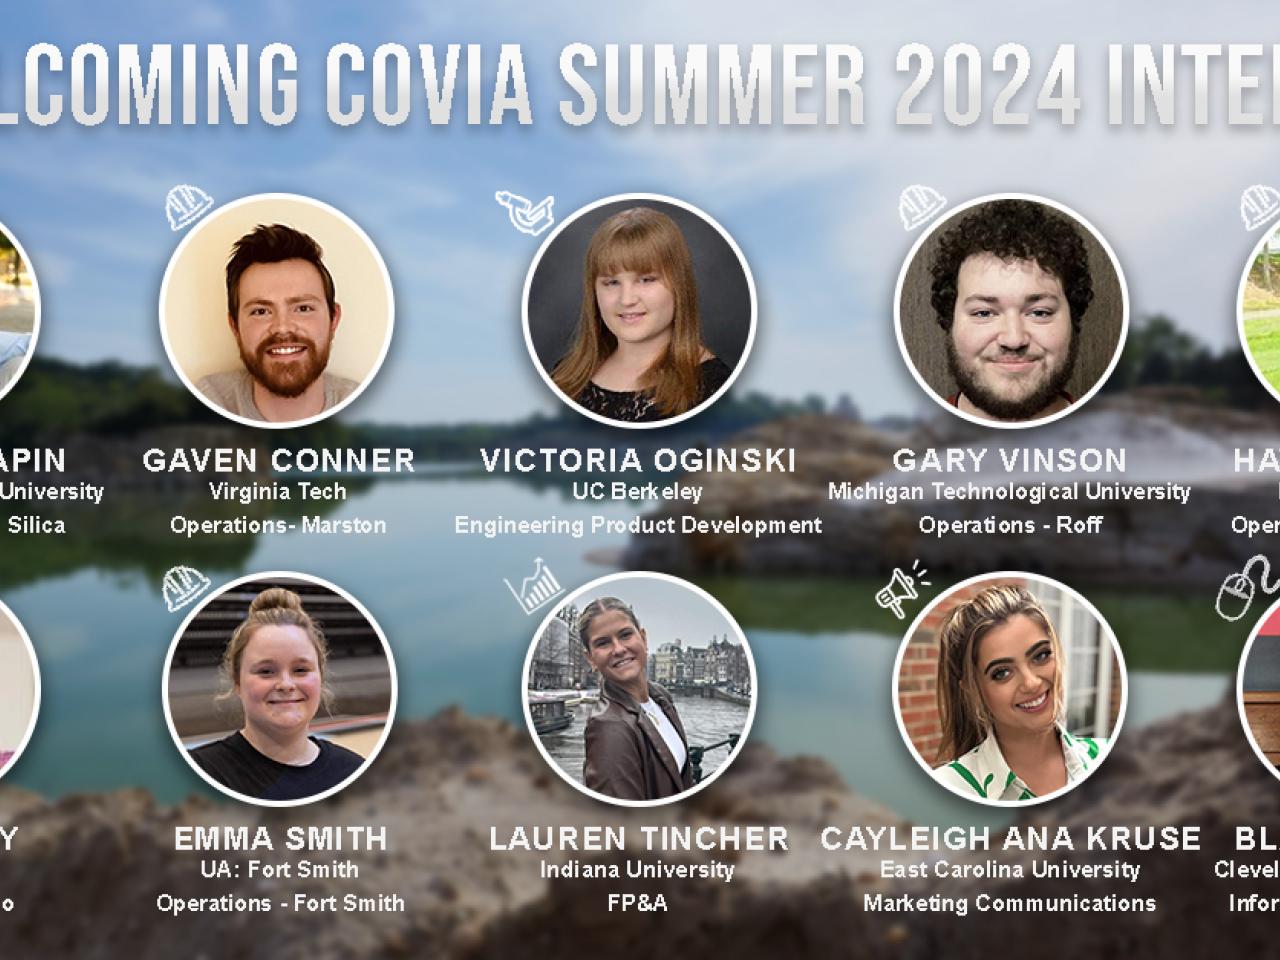 Profiles of the ten interns. "Welcoming Covia Summer 2024 Interns."